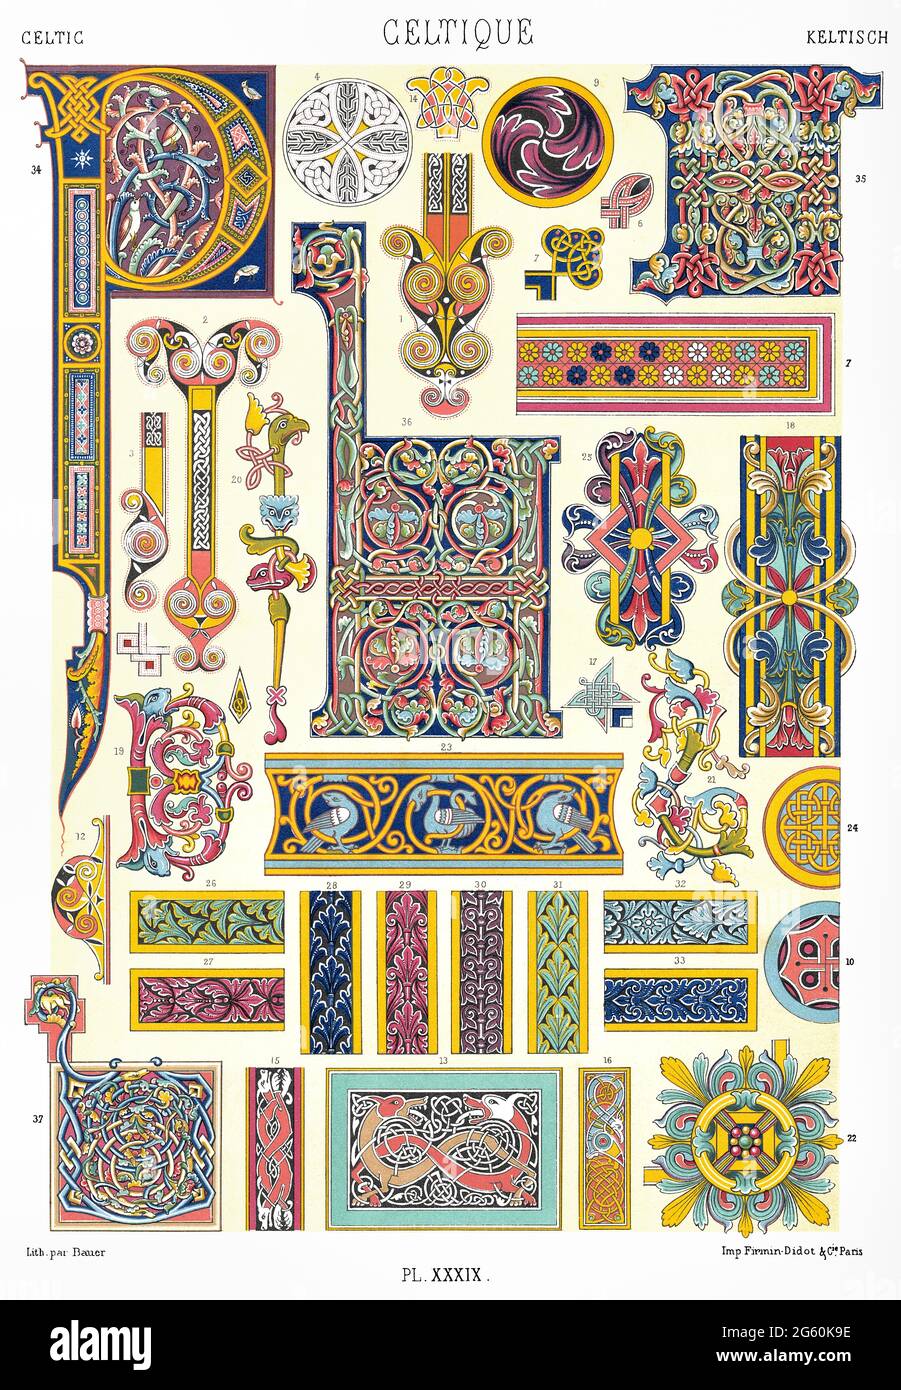 Middle Age - VII to XI Century, Celtic Ornaments - Chimeric Animals Mixed with the Curves, Magnificent Initials  etc. - By The Ornament 1880. Stock Photo